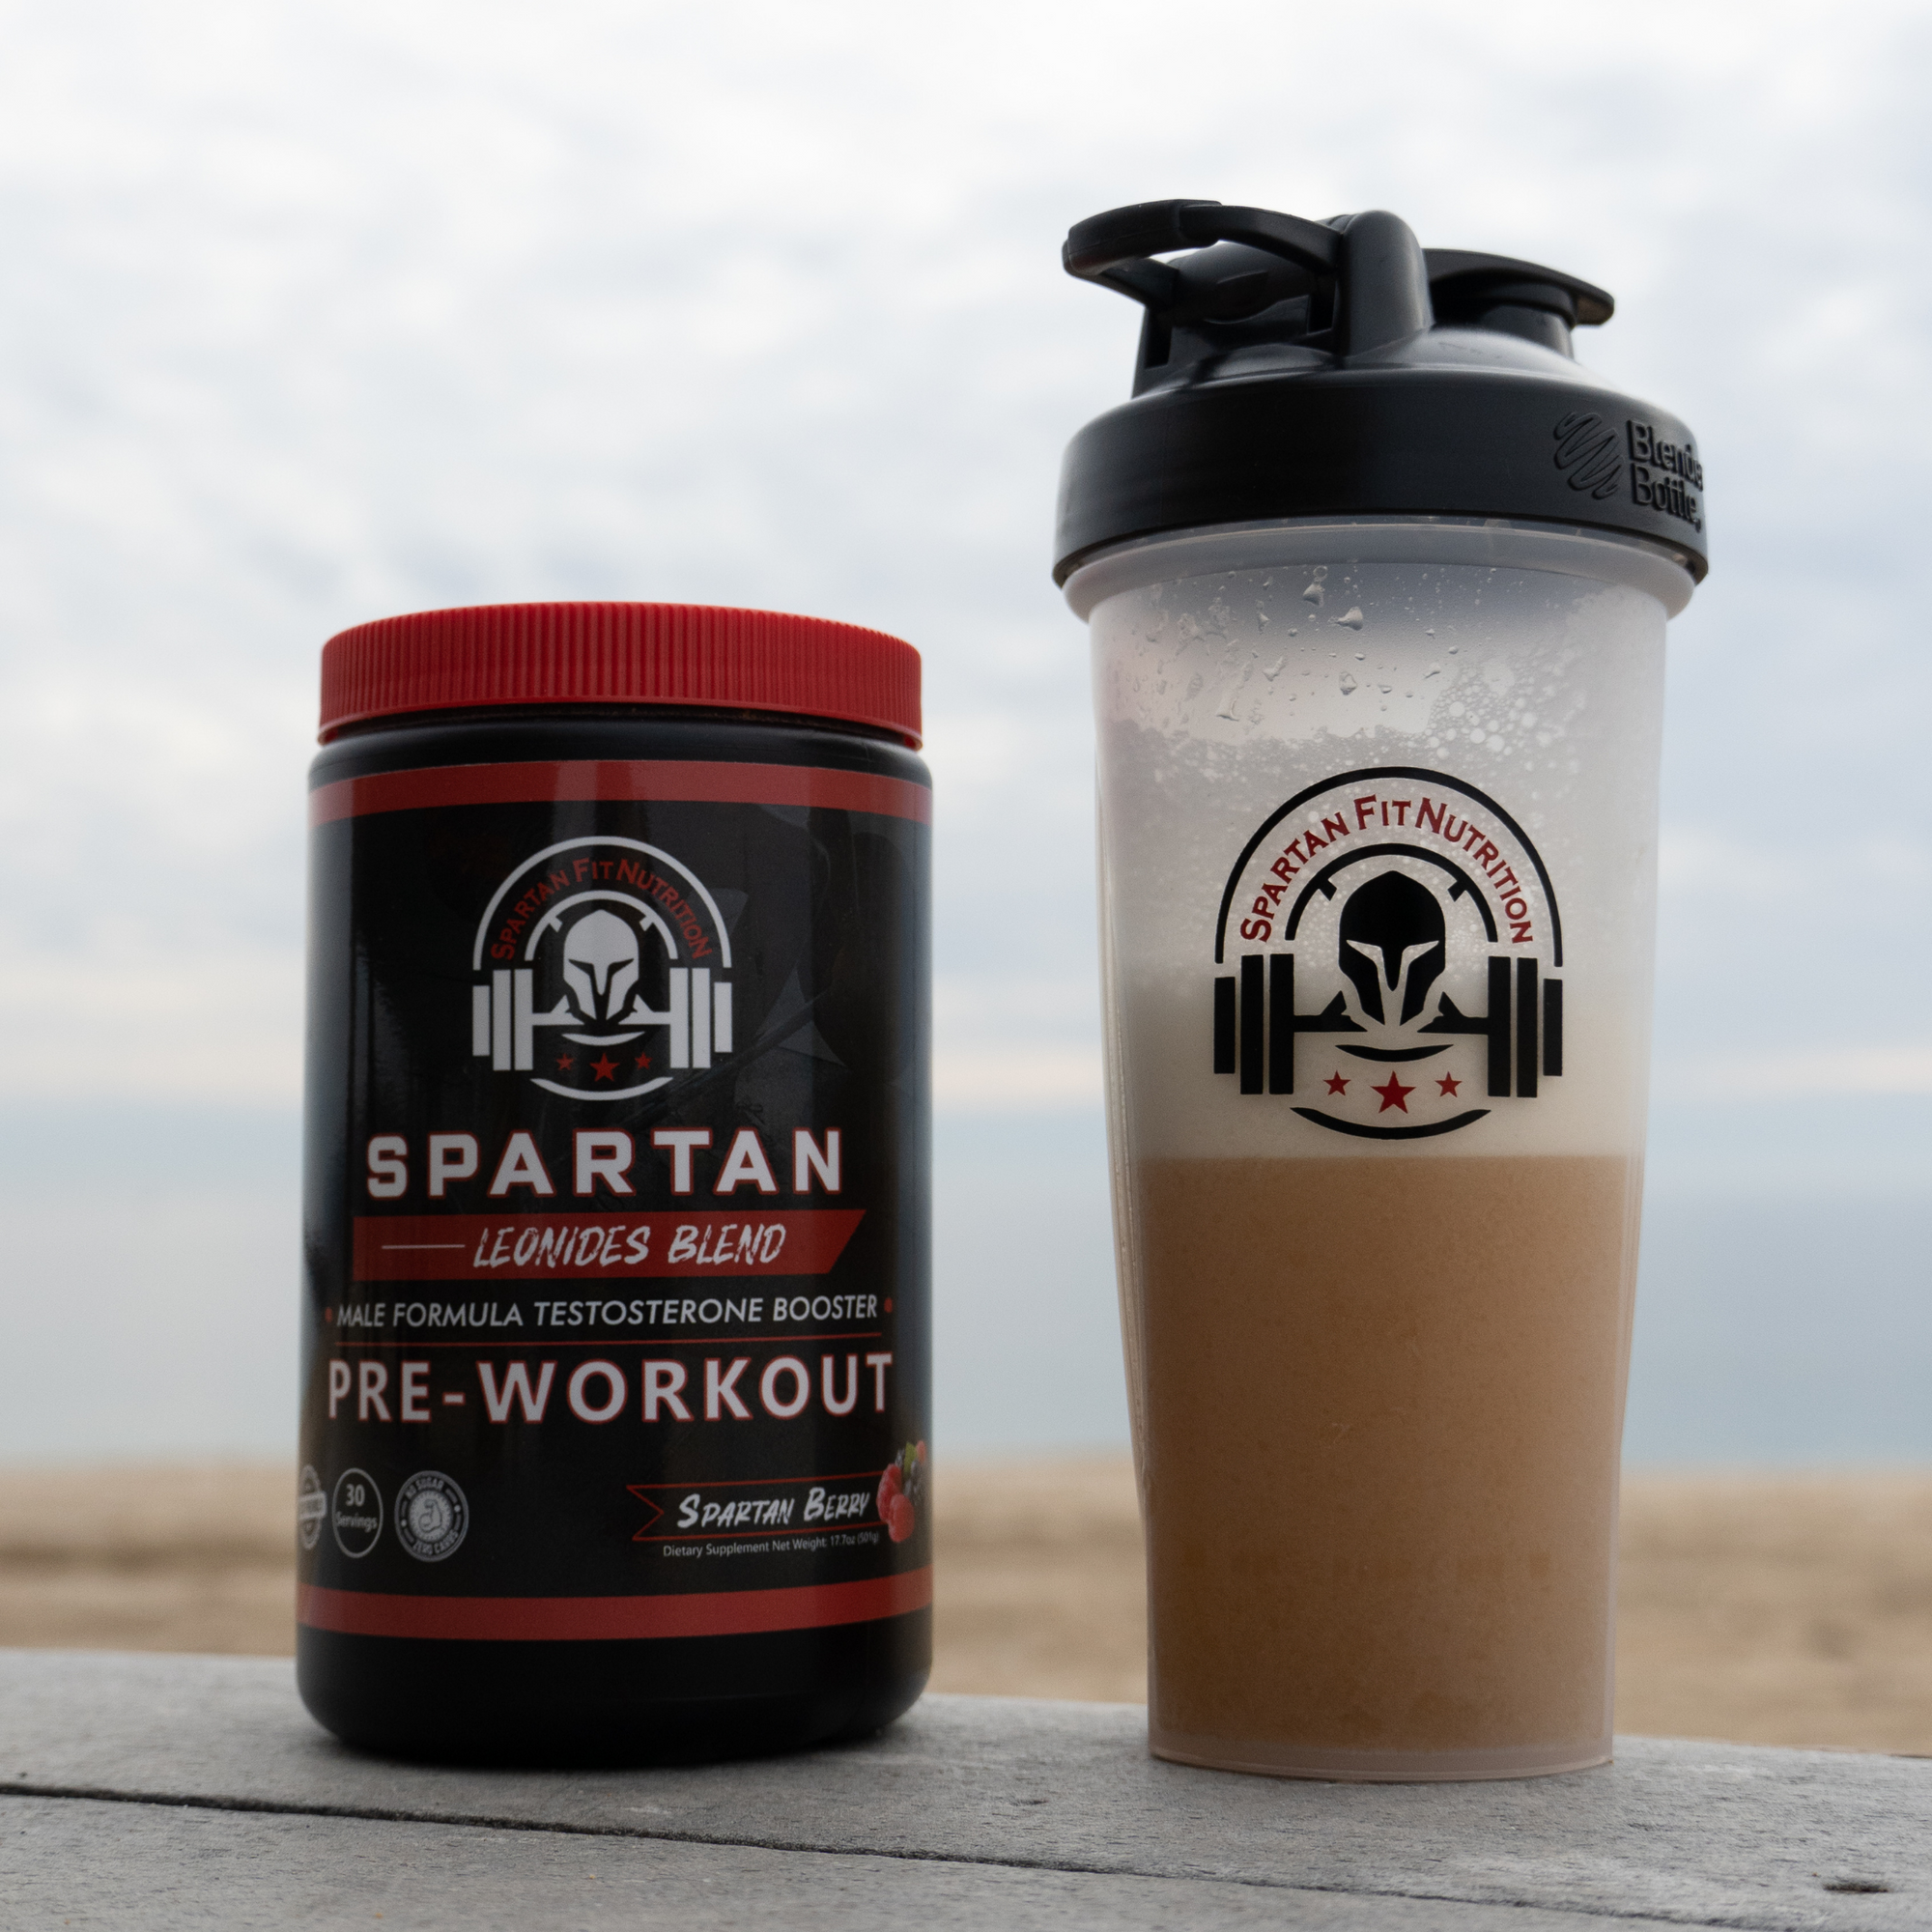 Leonidas Blend Pre-workout and Spartan Fit Shaker Bottle sitting on bench in Newport Beach 